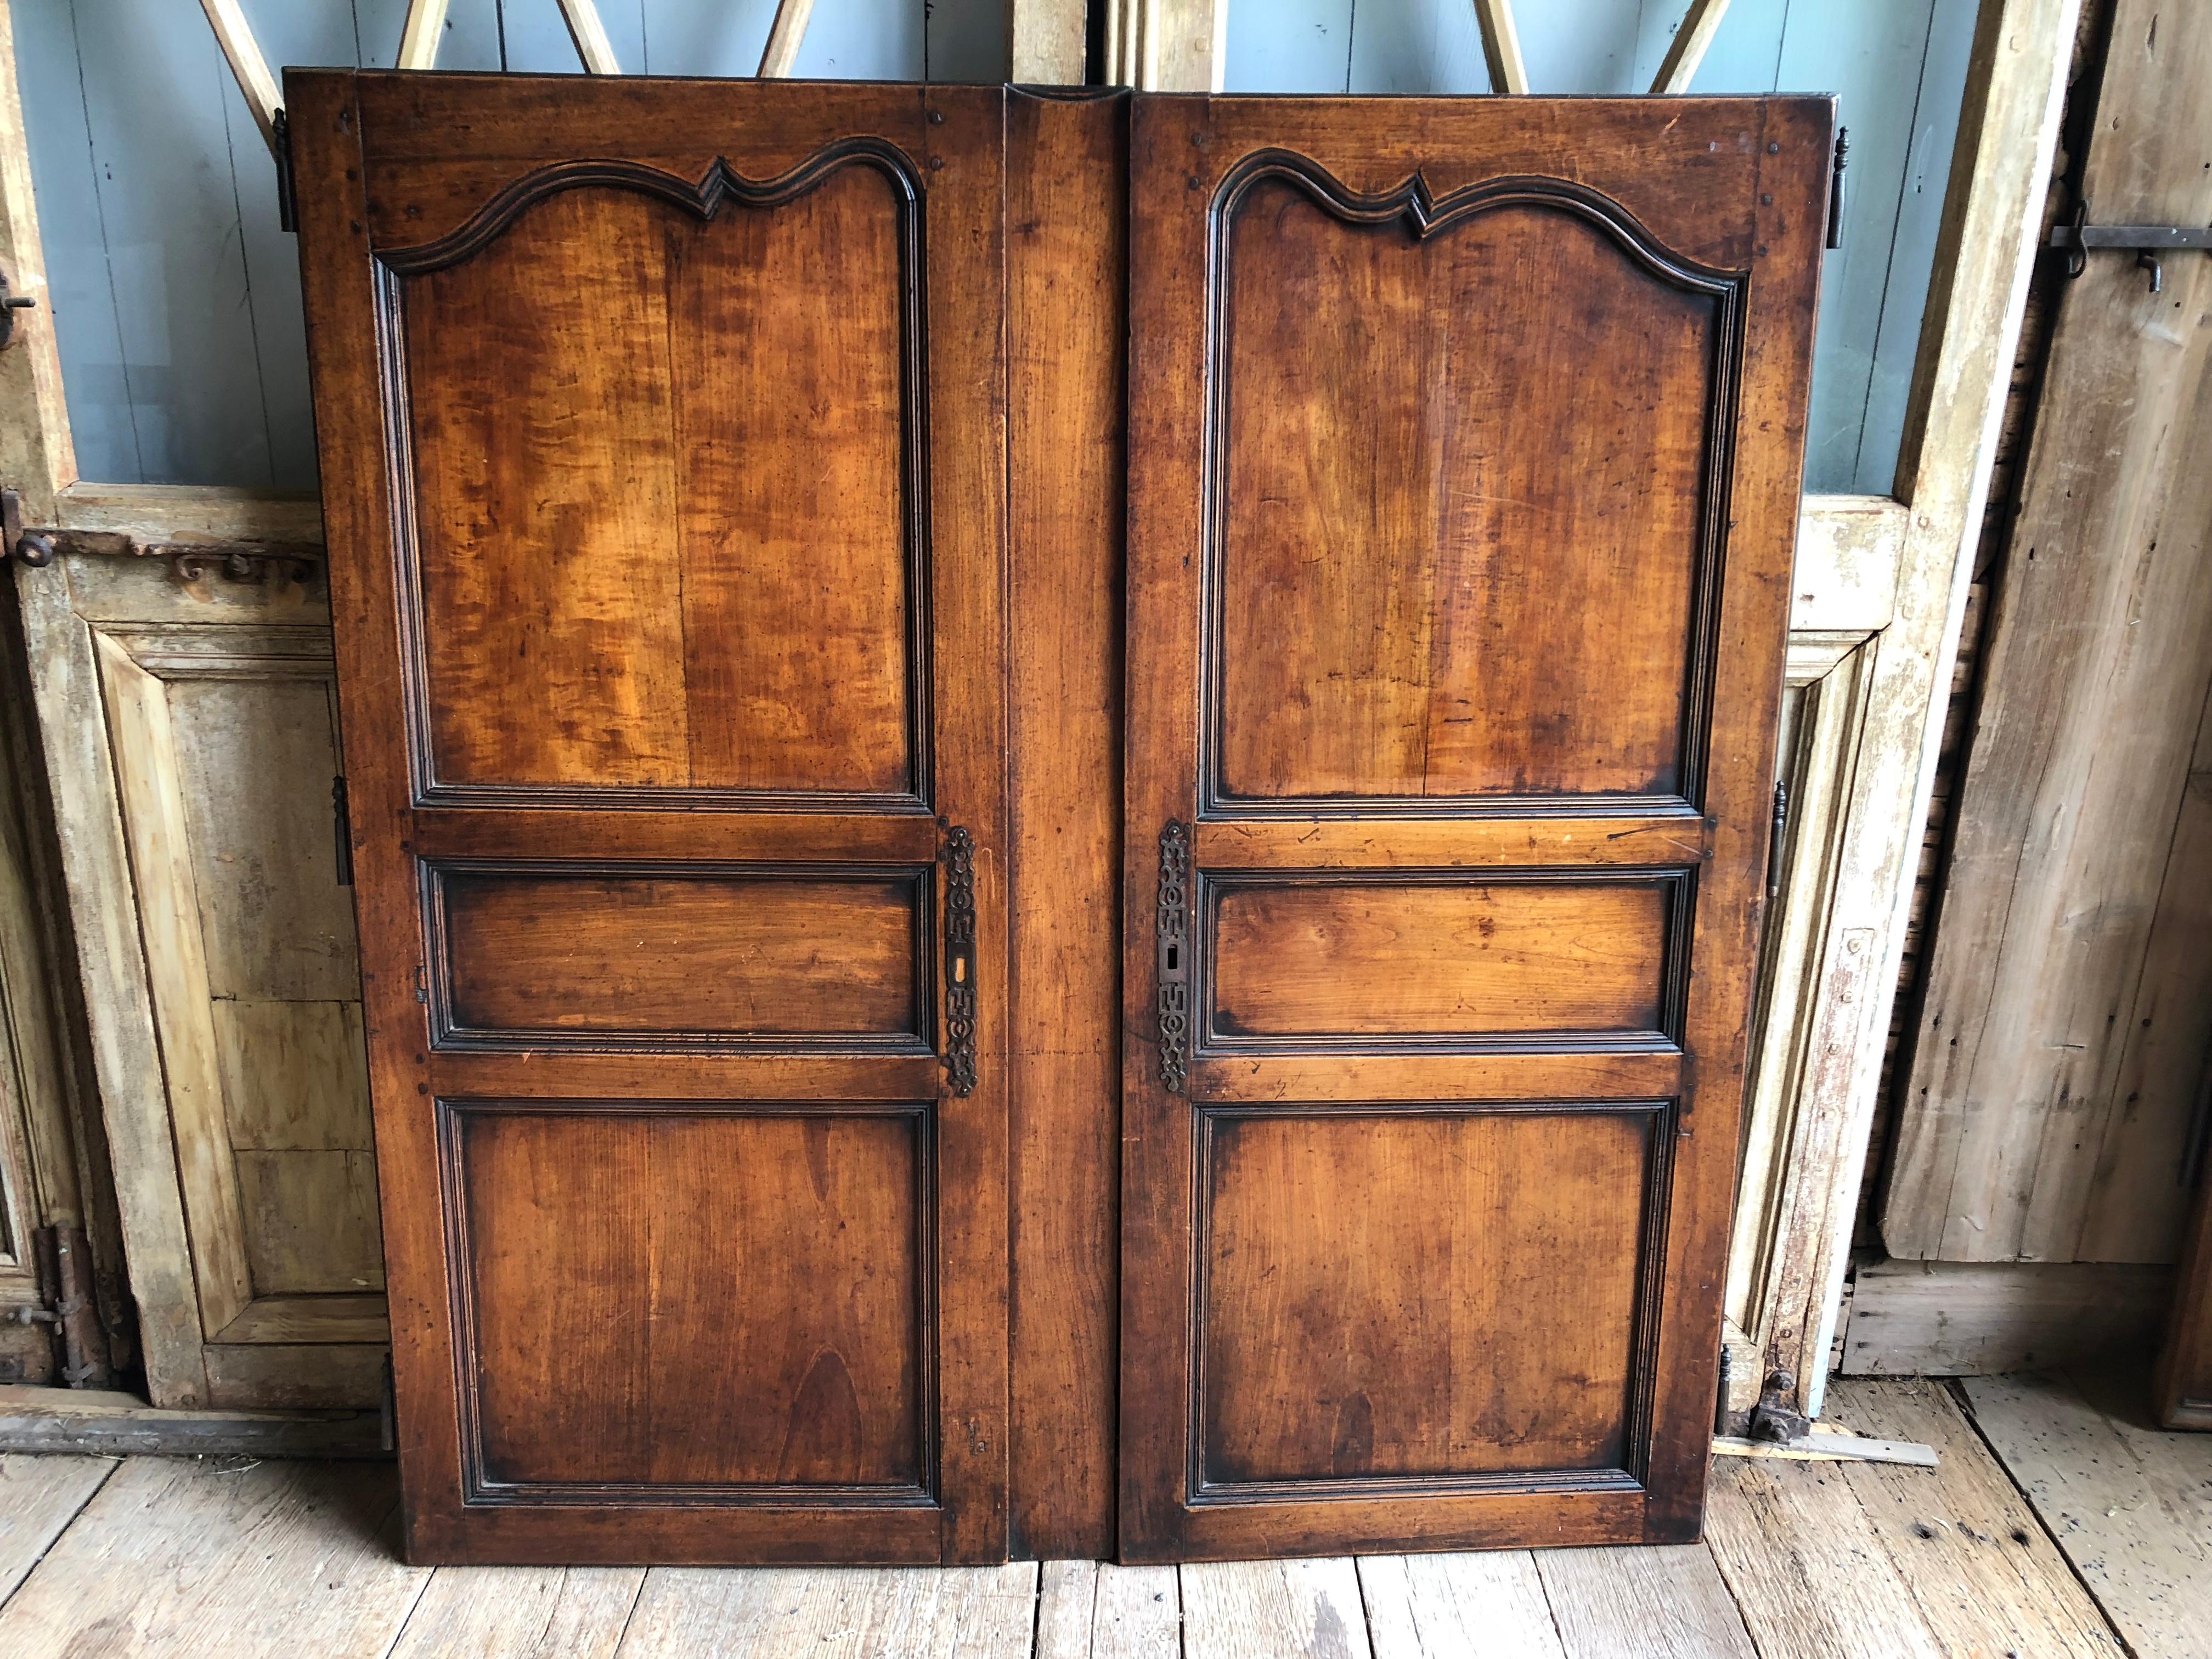 A pair of French Provincial cabinet doors in walnut, Louis XV period circa 1770, with iron hardware. Nice patina. 
Each door is 25” wide x 59” height. The center divider is 5” wide and is attached to the left door but is removable.
 